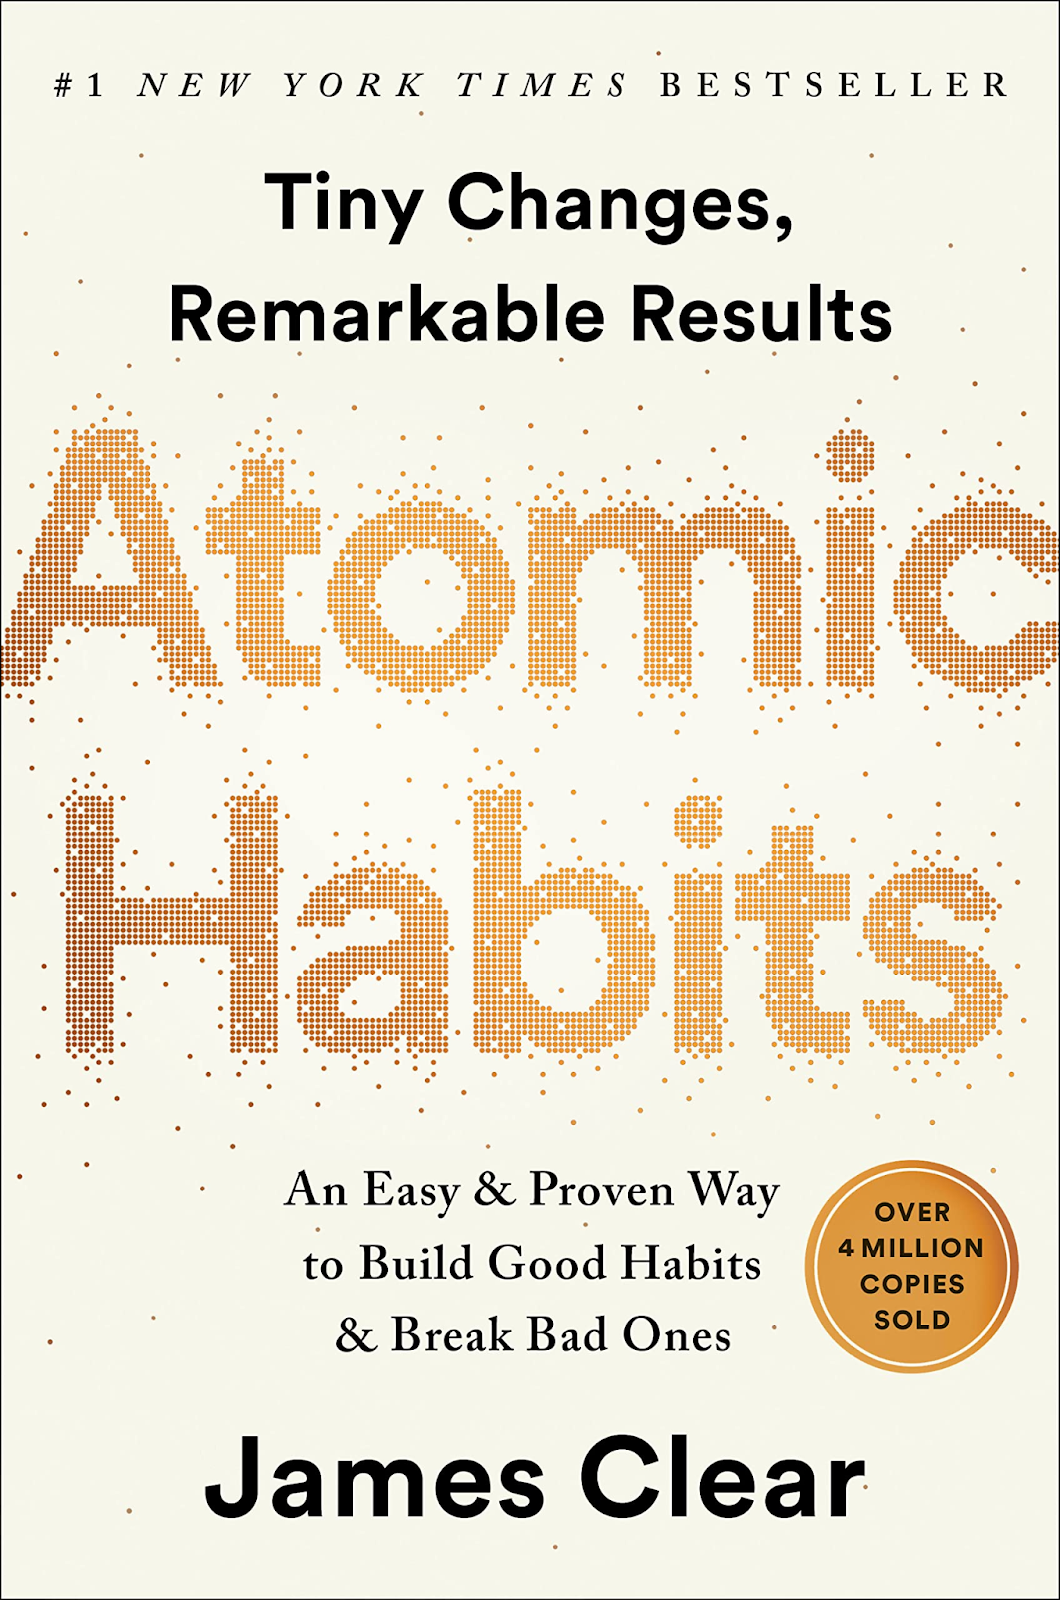 Atomic Habits by James Clear book cover